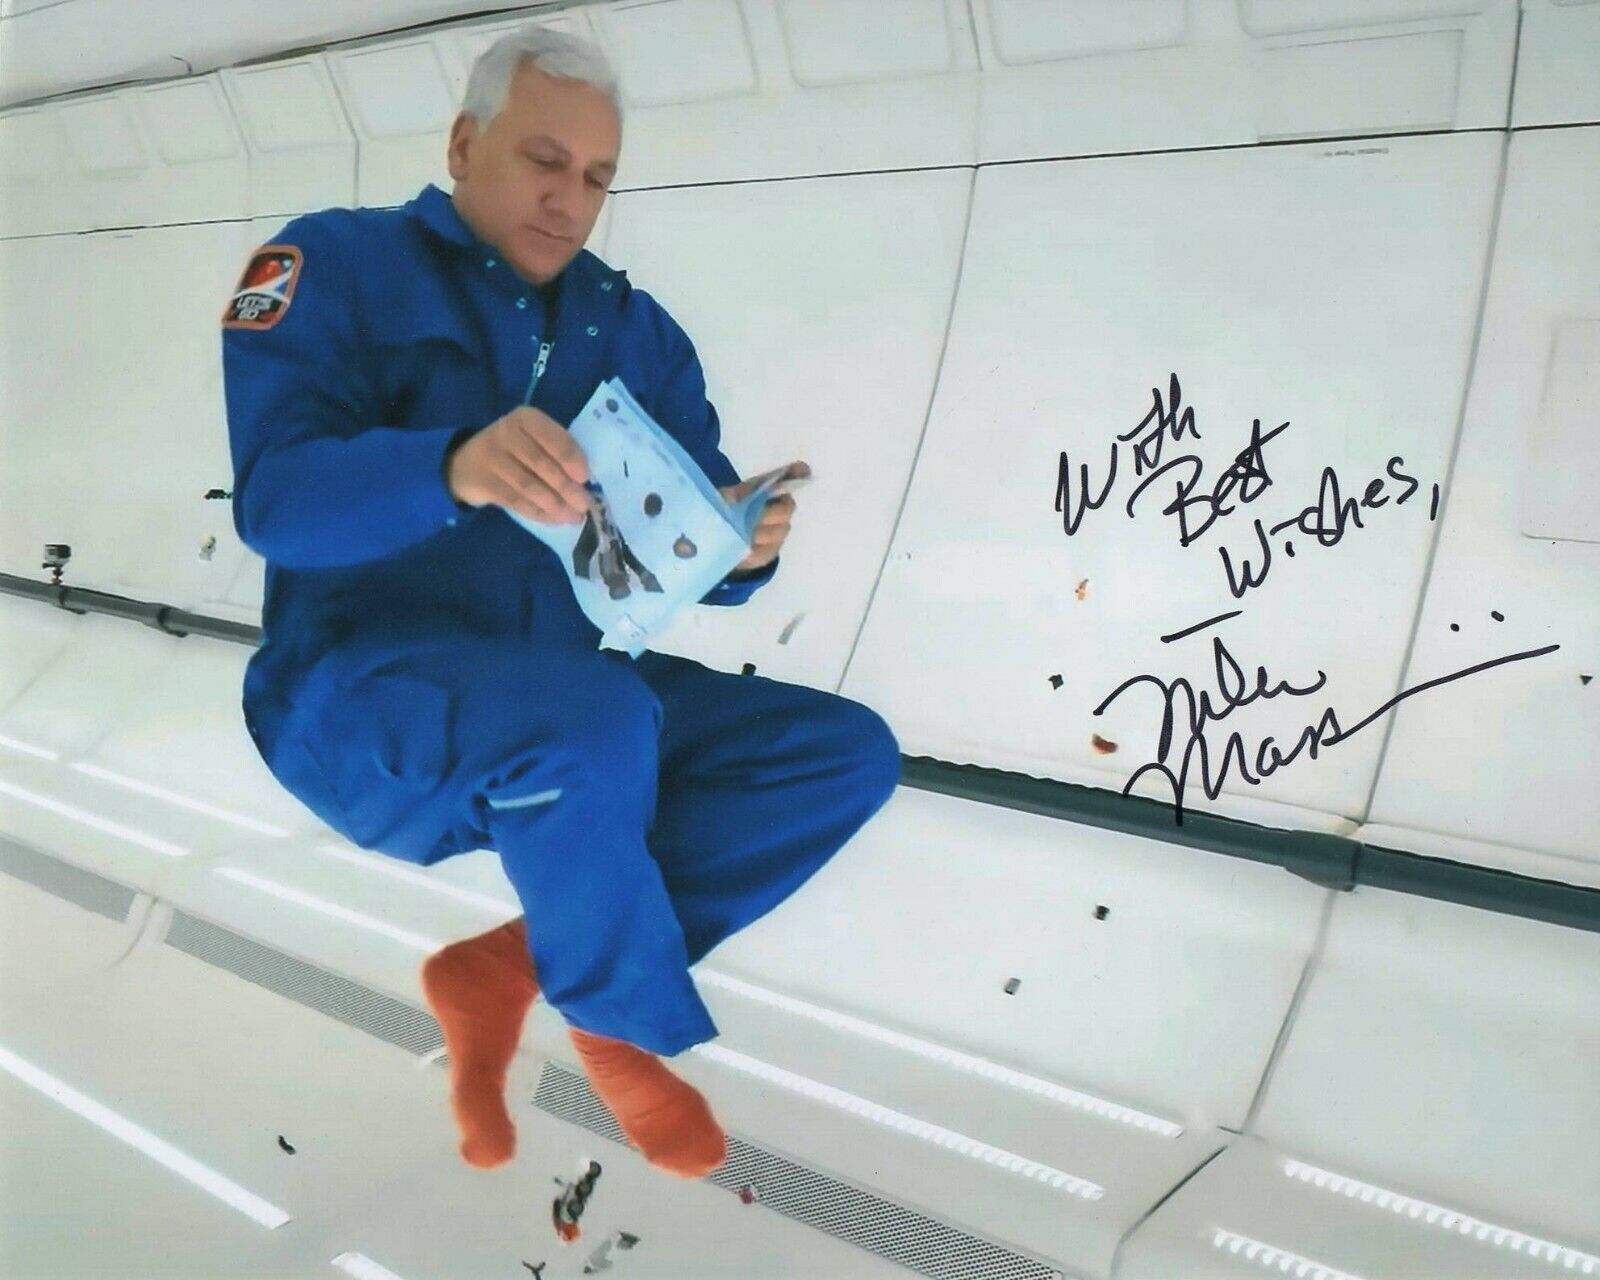 MIKE MASSIMINO SIGNED AUTOGRAPH 8X10 Photo Poster painting - NASA ASTRONAUT IN SPACE, VERY RARE!